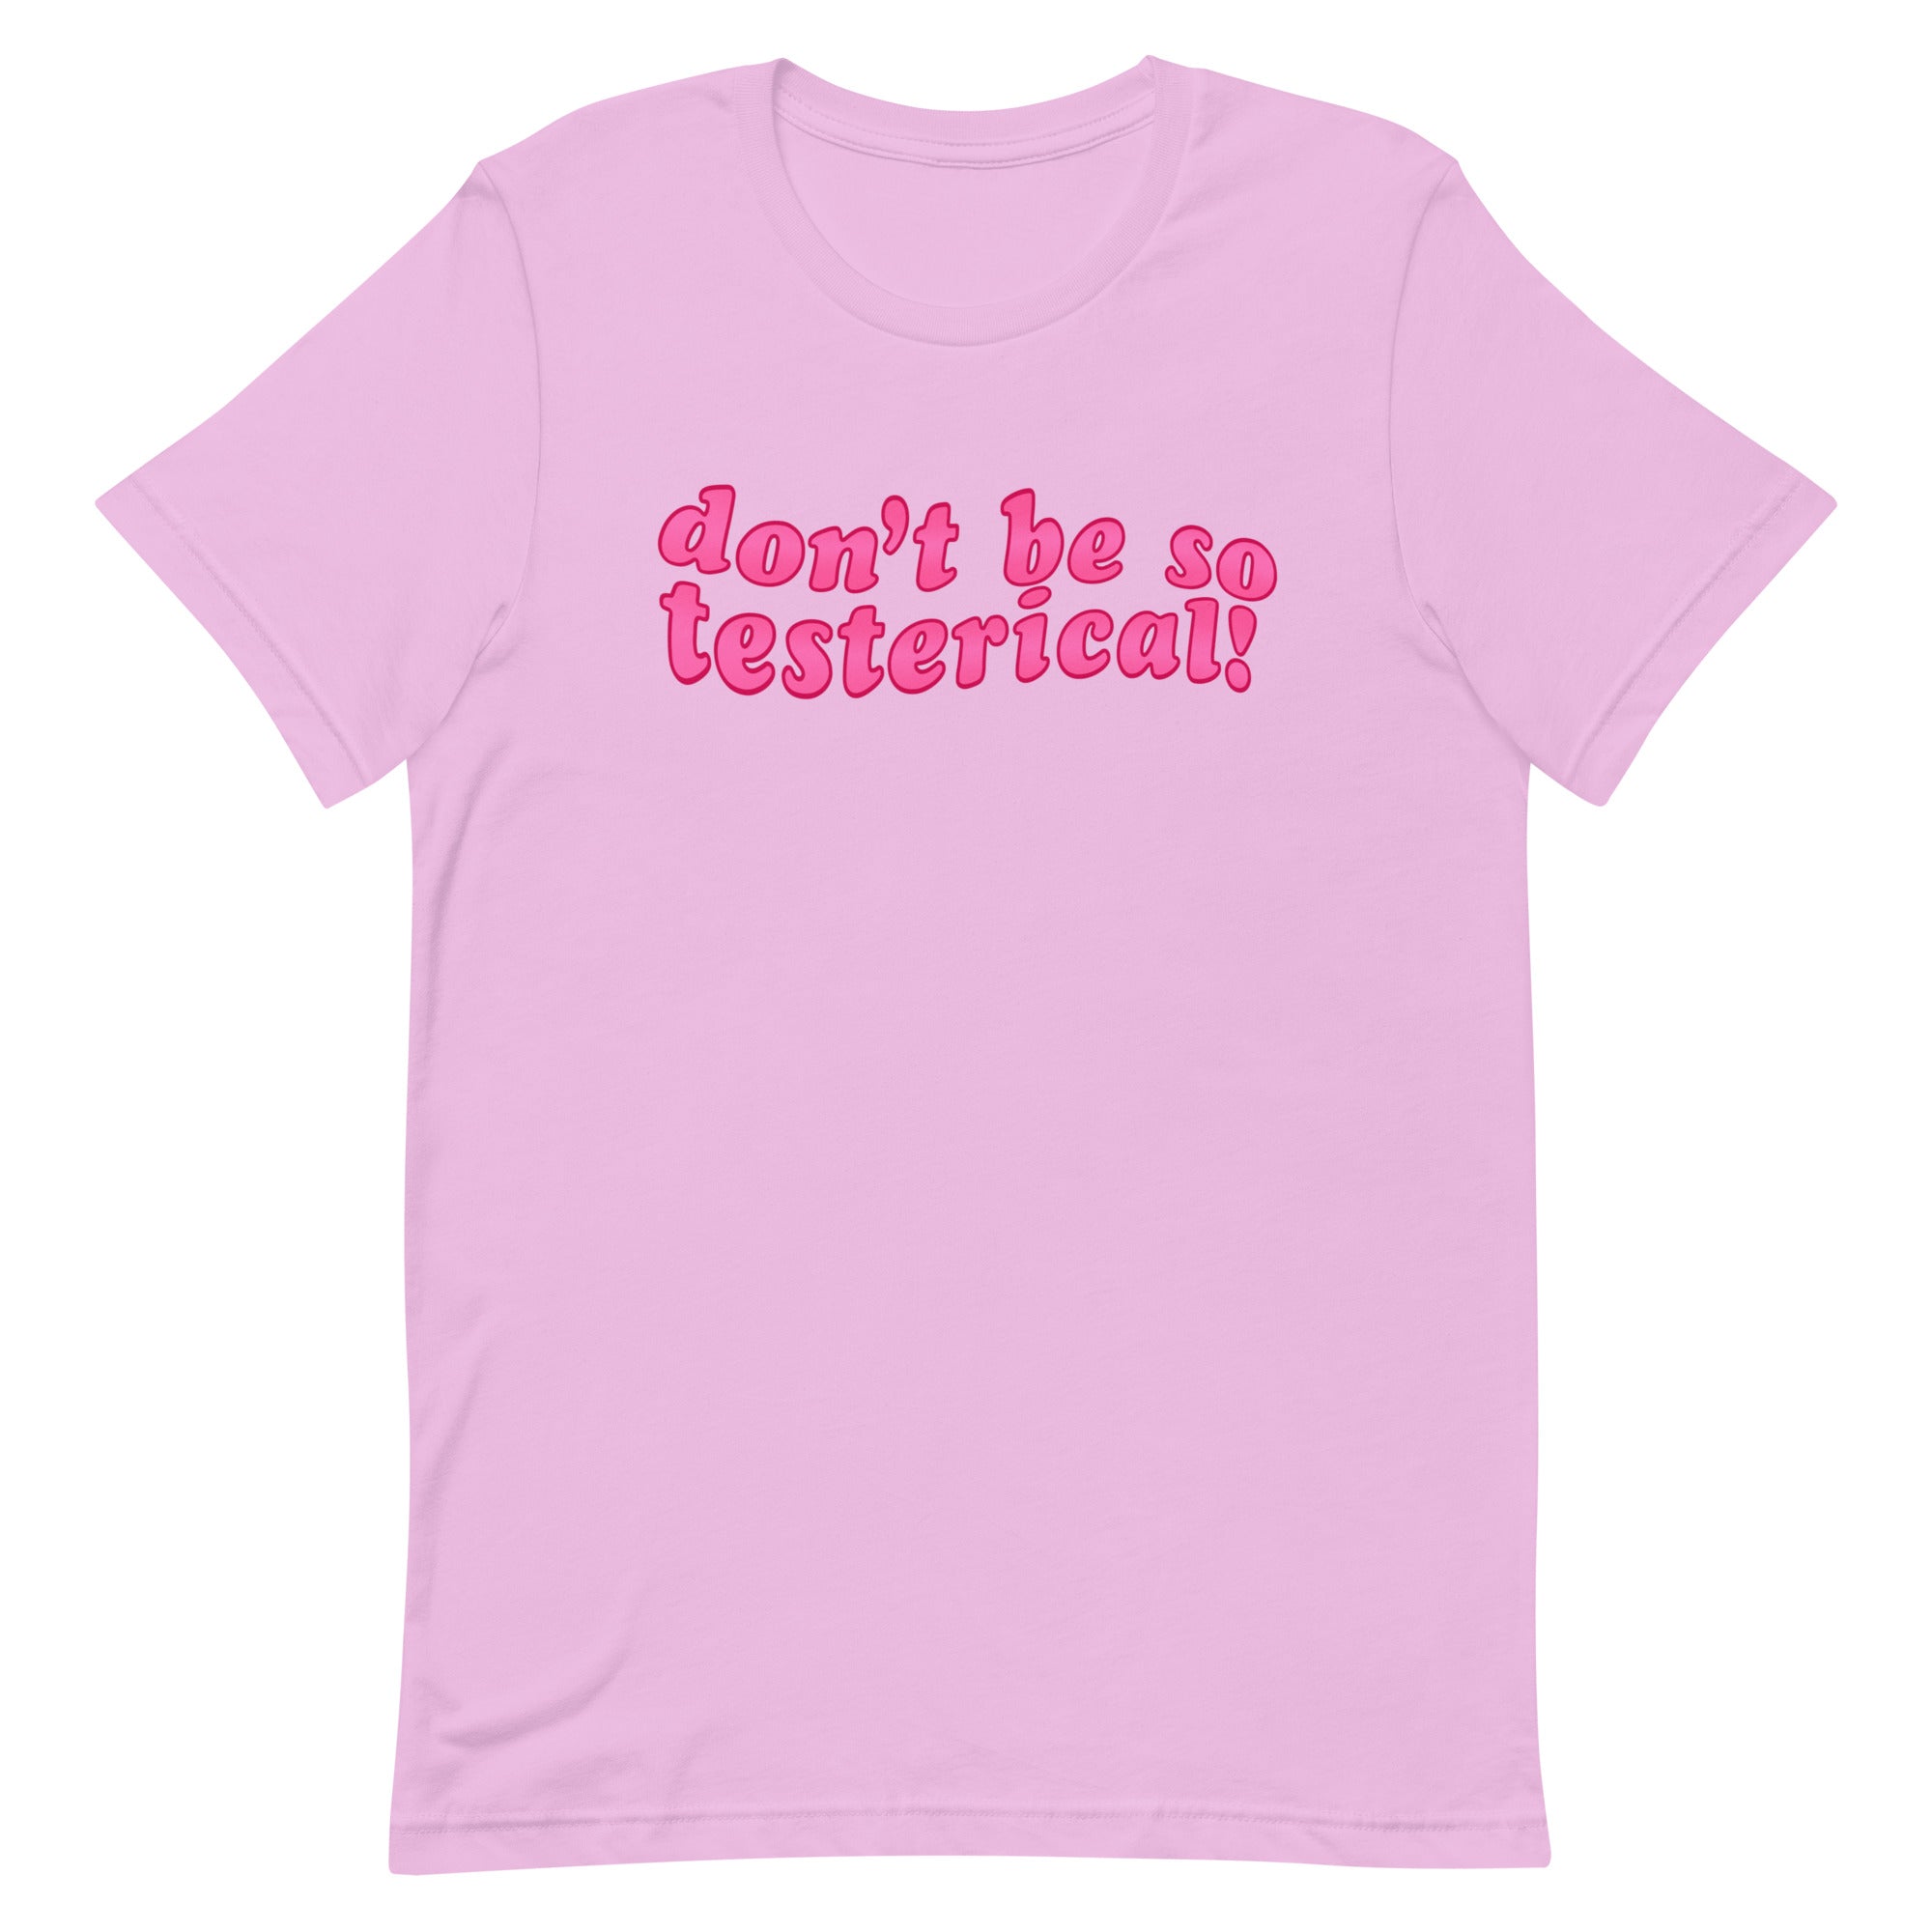 Don’t Be So Testerical! Unisex Feminist T-shirt - Shop Women’s Rights T-shirts - Feminist Trash Store - Lilac